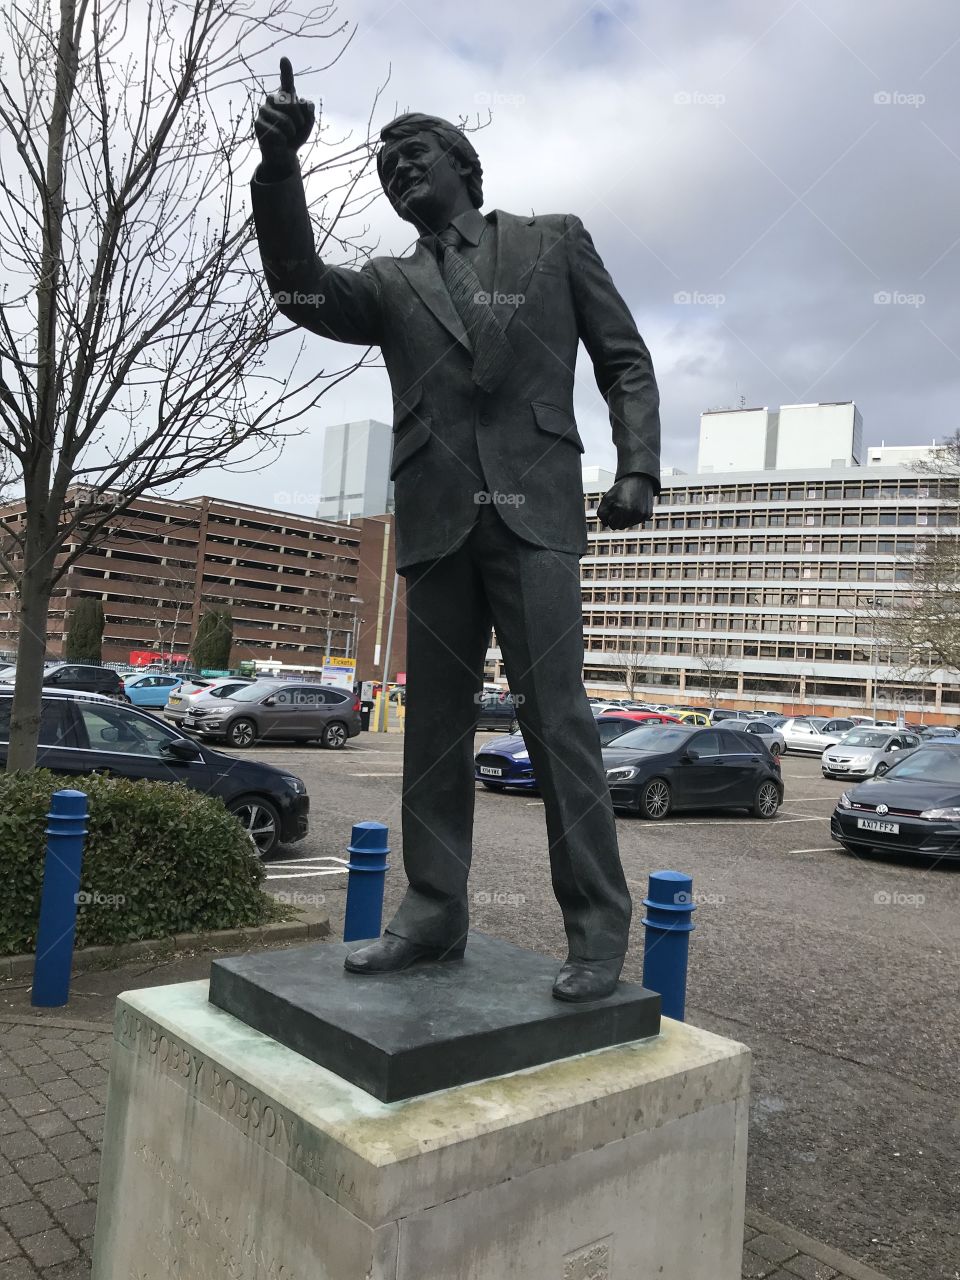 Sir Bobby Robson,former manager of England and Ipswich town and a true gentleman of the game.